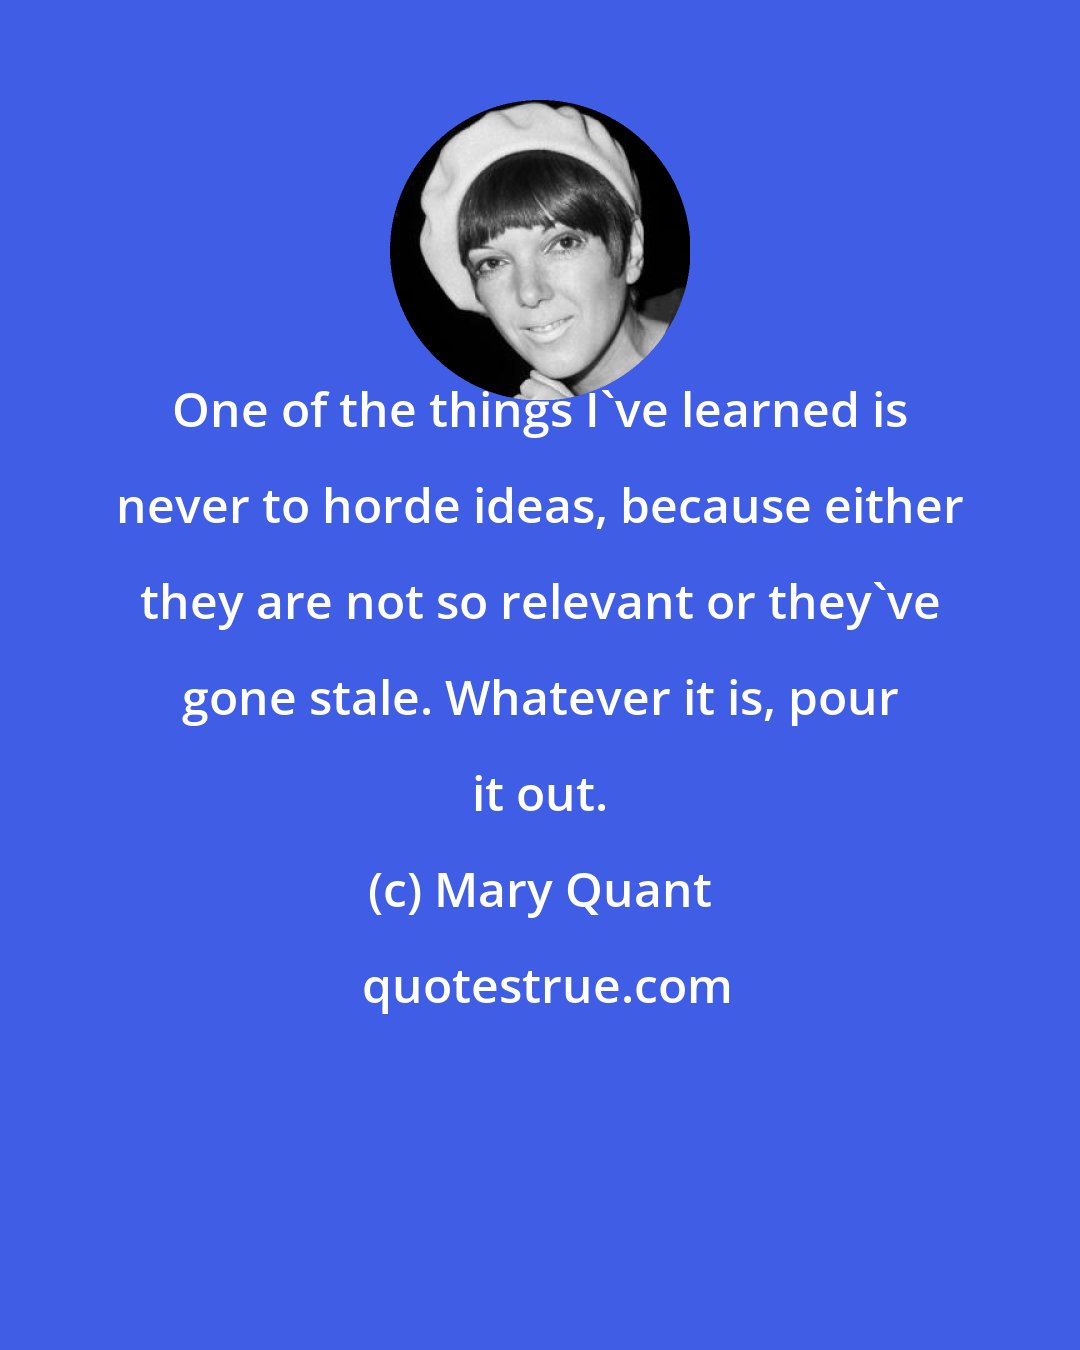 Mary Quant: One of the things I've learned is never to horde ideas, because either they are not so relevant or they've gone stale. Whatever it is, pour it out.